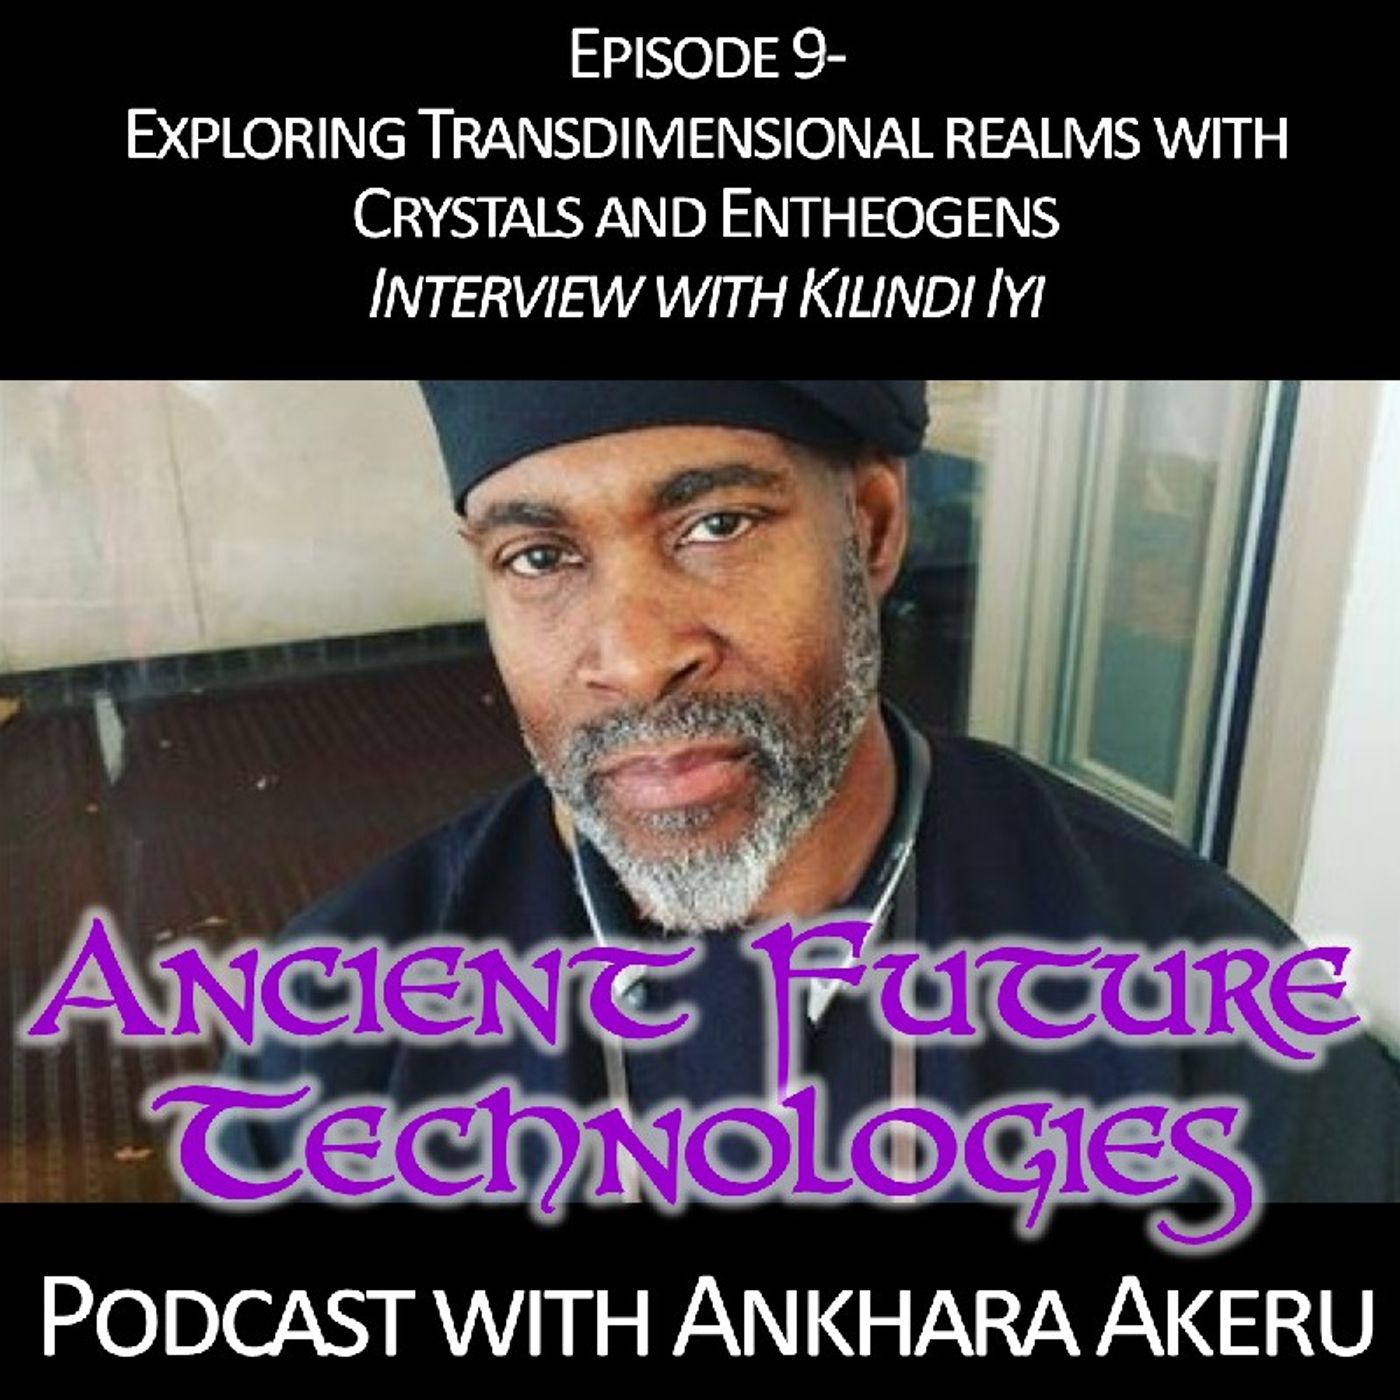 Episode 009 Exloring Transdimentional Realms with Crystals and Entheogens: Interview with Kilindi Iyi